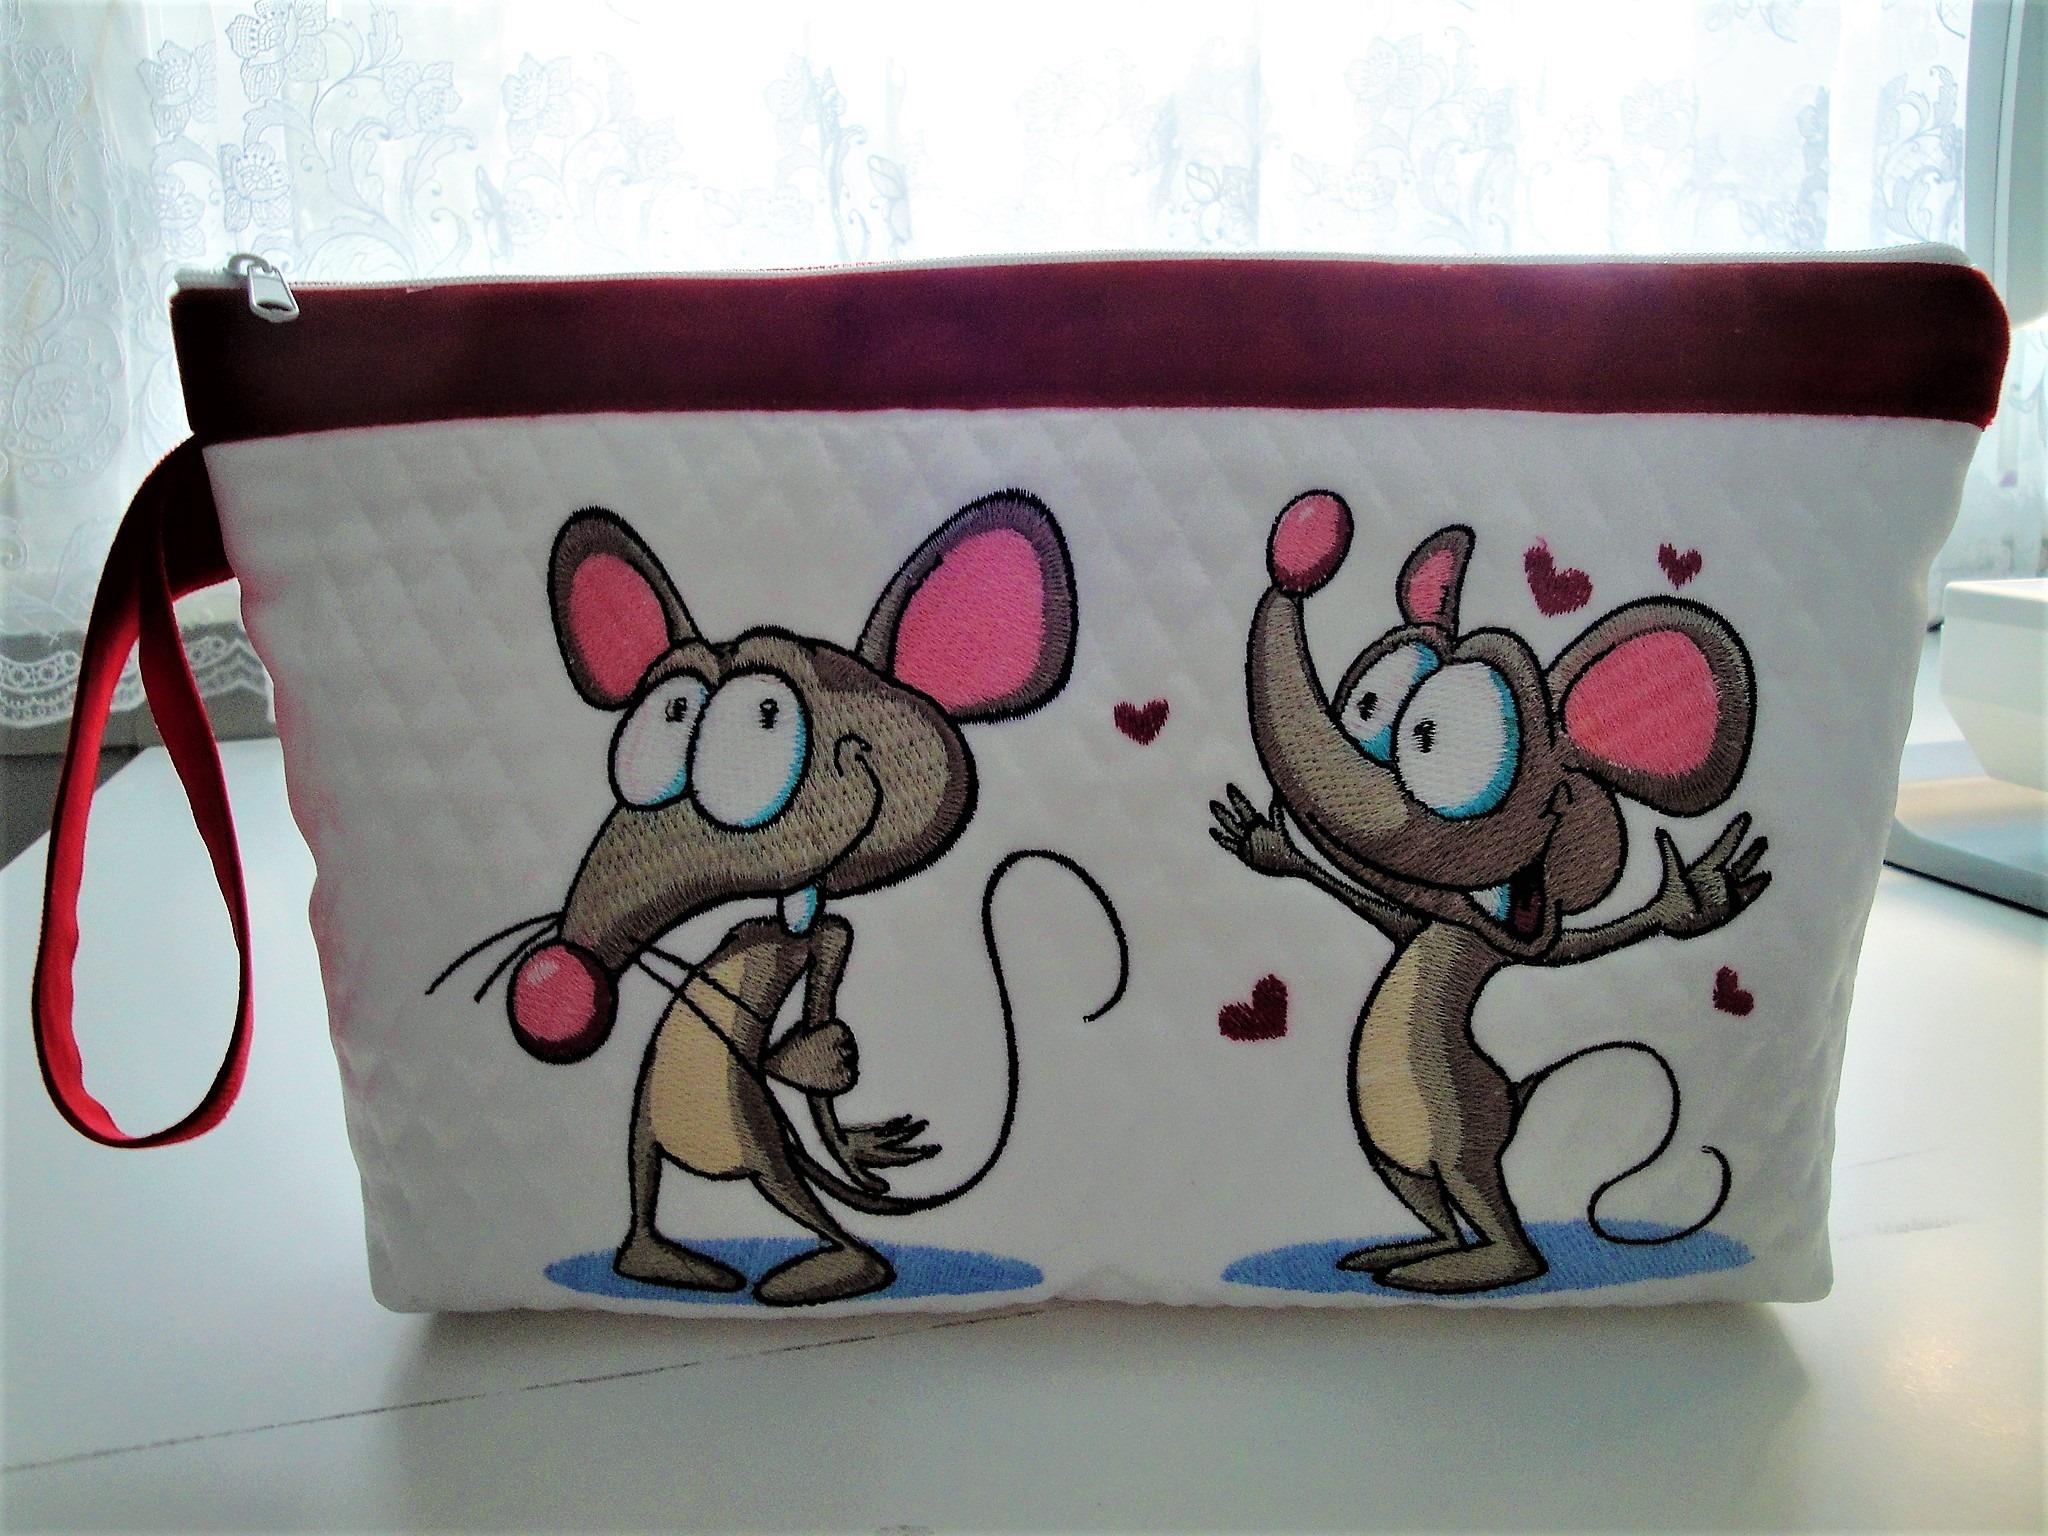 Embroidered Cosmetics Bag with Mouse Design: Adorable and Functional Accessory